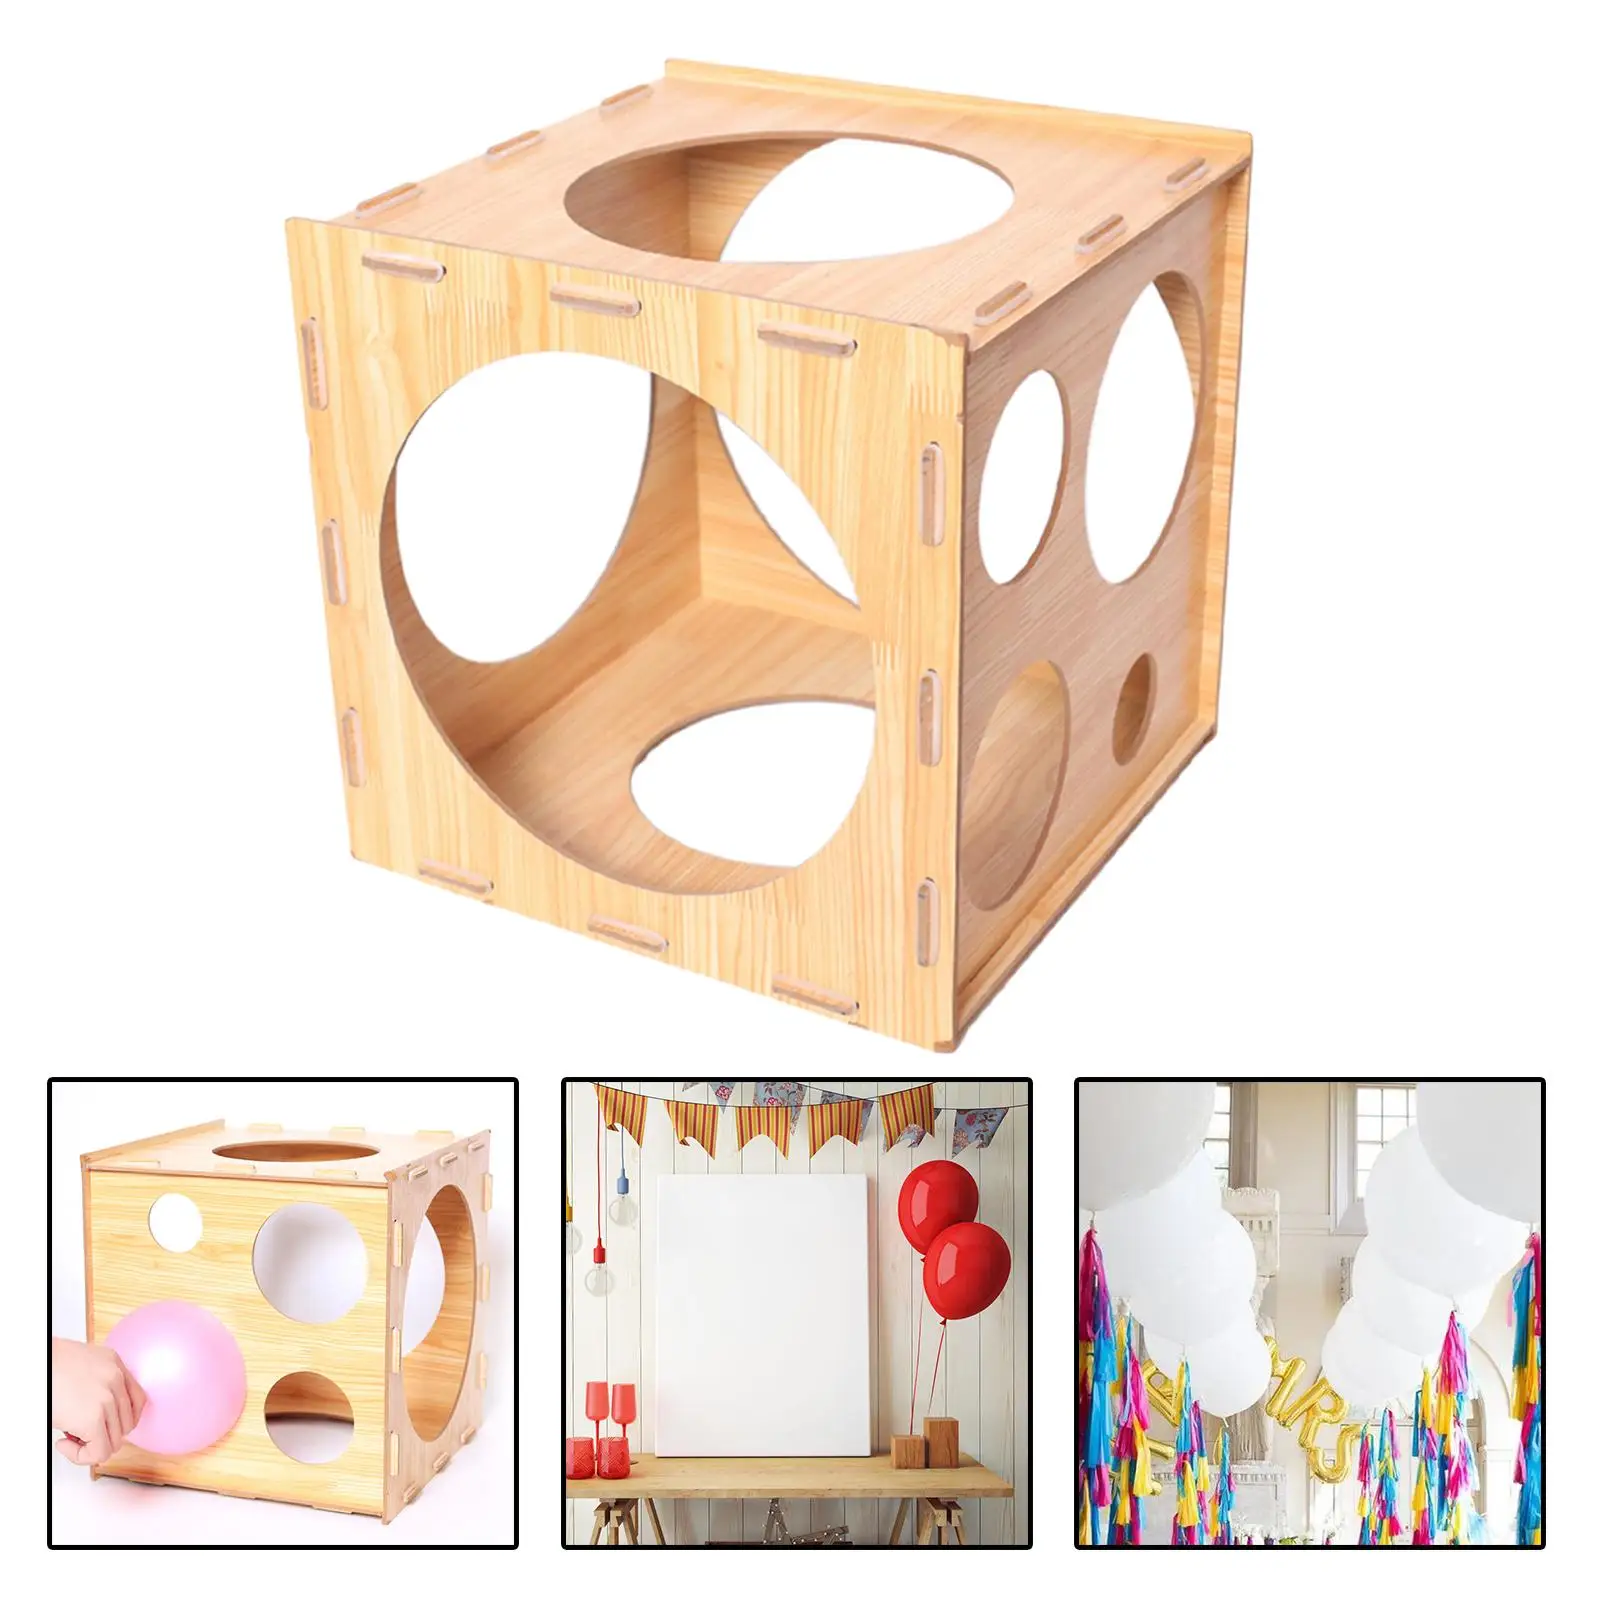 2-10 inch Balloon Sizer Box Cubic Wooden 9 Holes Balloon Size Measurement Box for Balloon Decorations Wedding Birthday Party